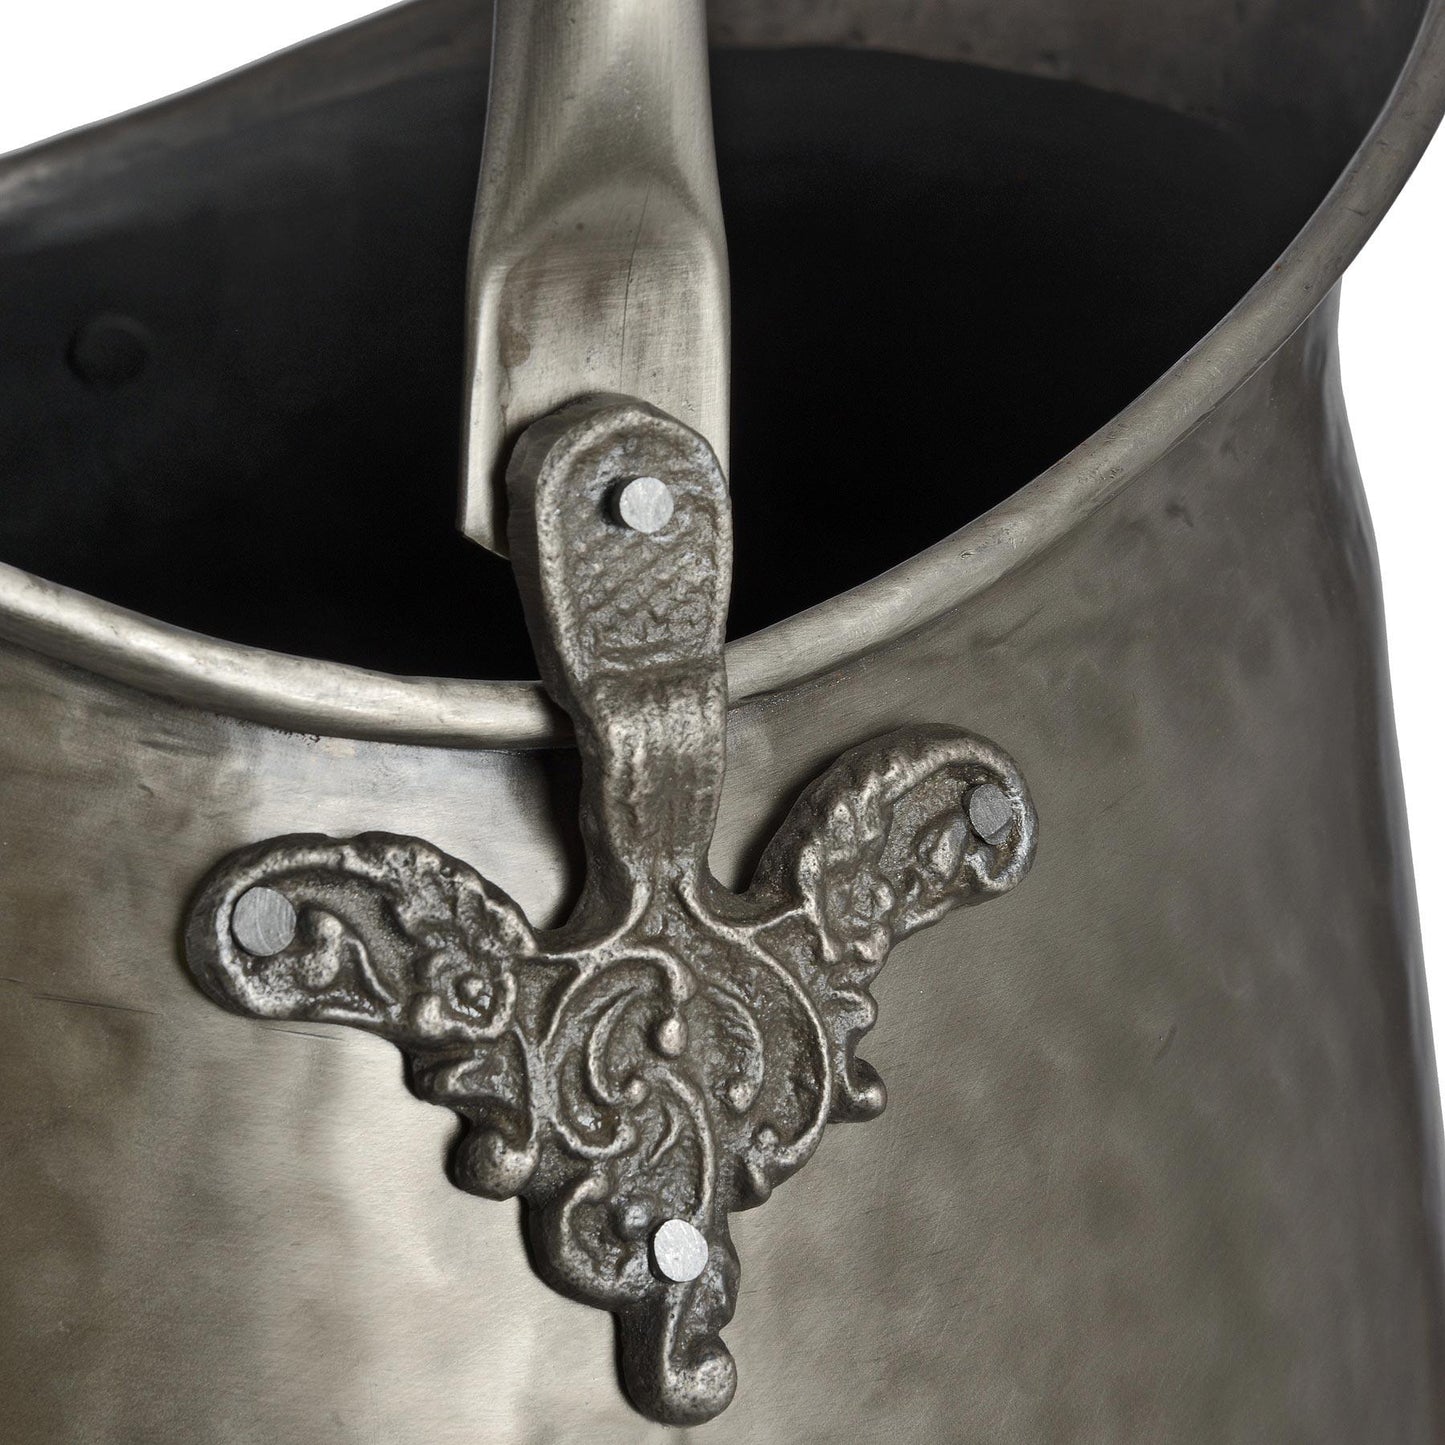 Antique Pewter Coal Bucket - Ashton and Finch